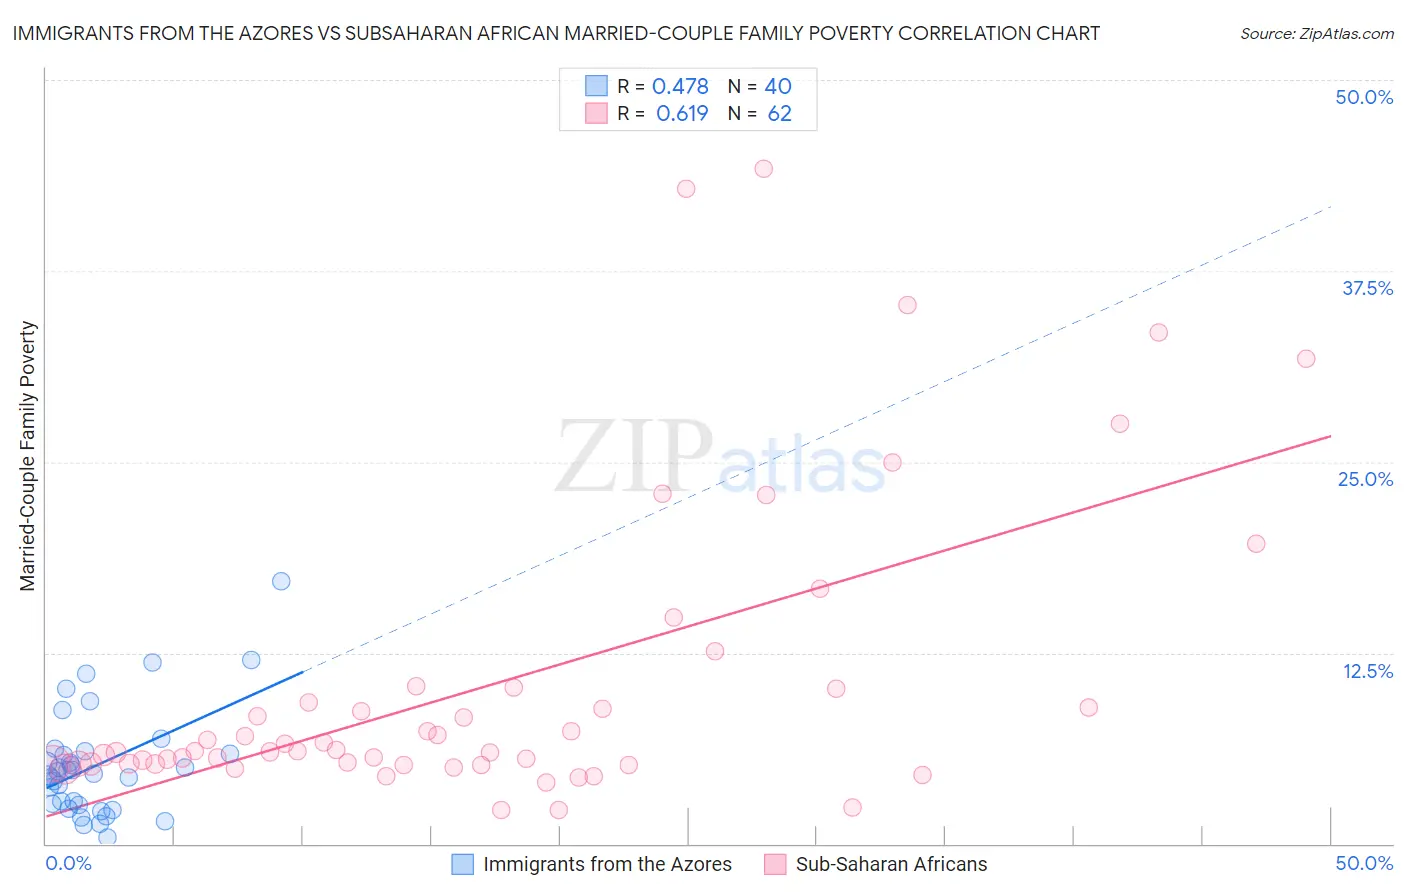 Immigrants from the Azores vs Subsaharan African Married-Couple Family Poverty